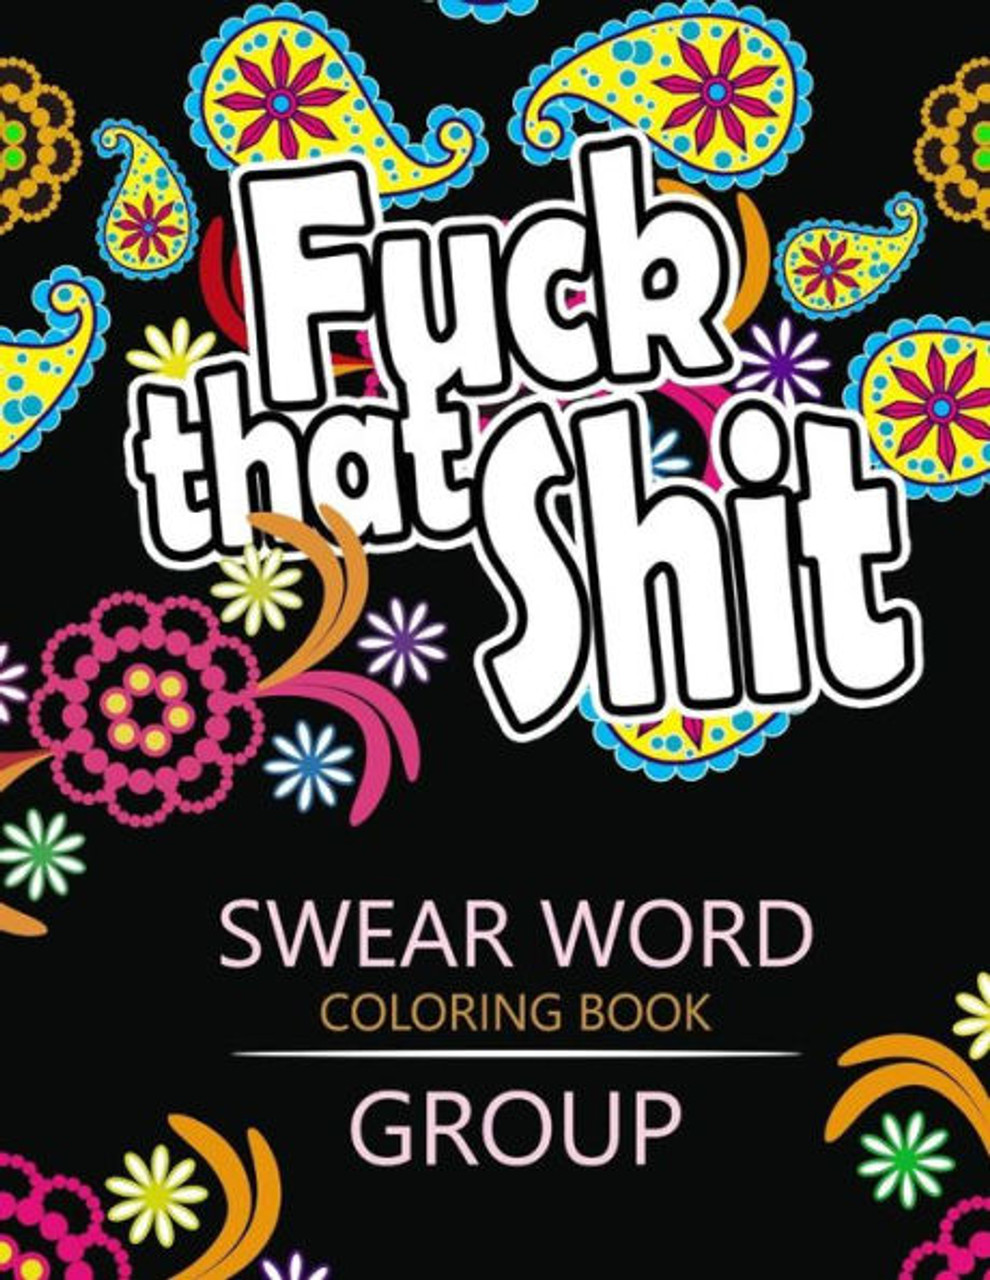 A Swear Word Coloring Book for Adults